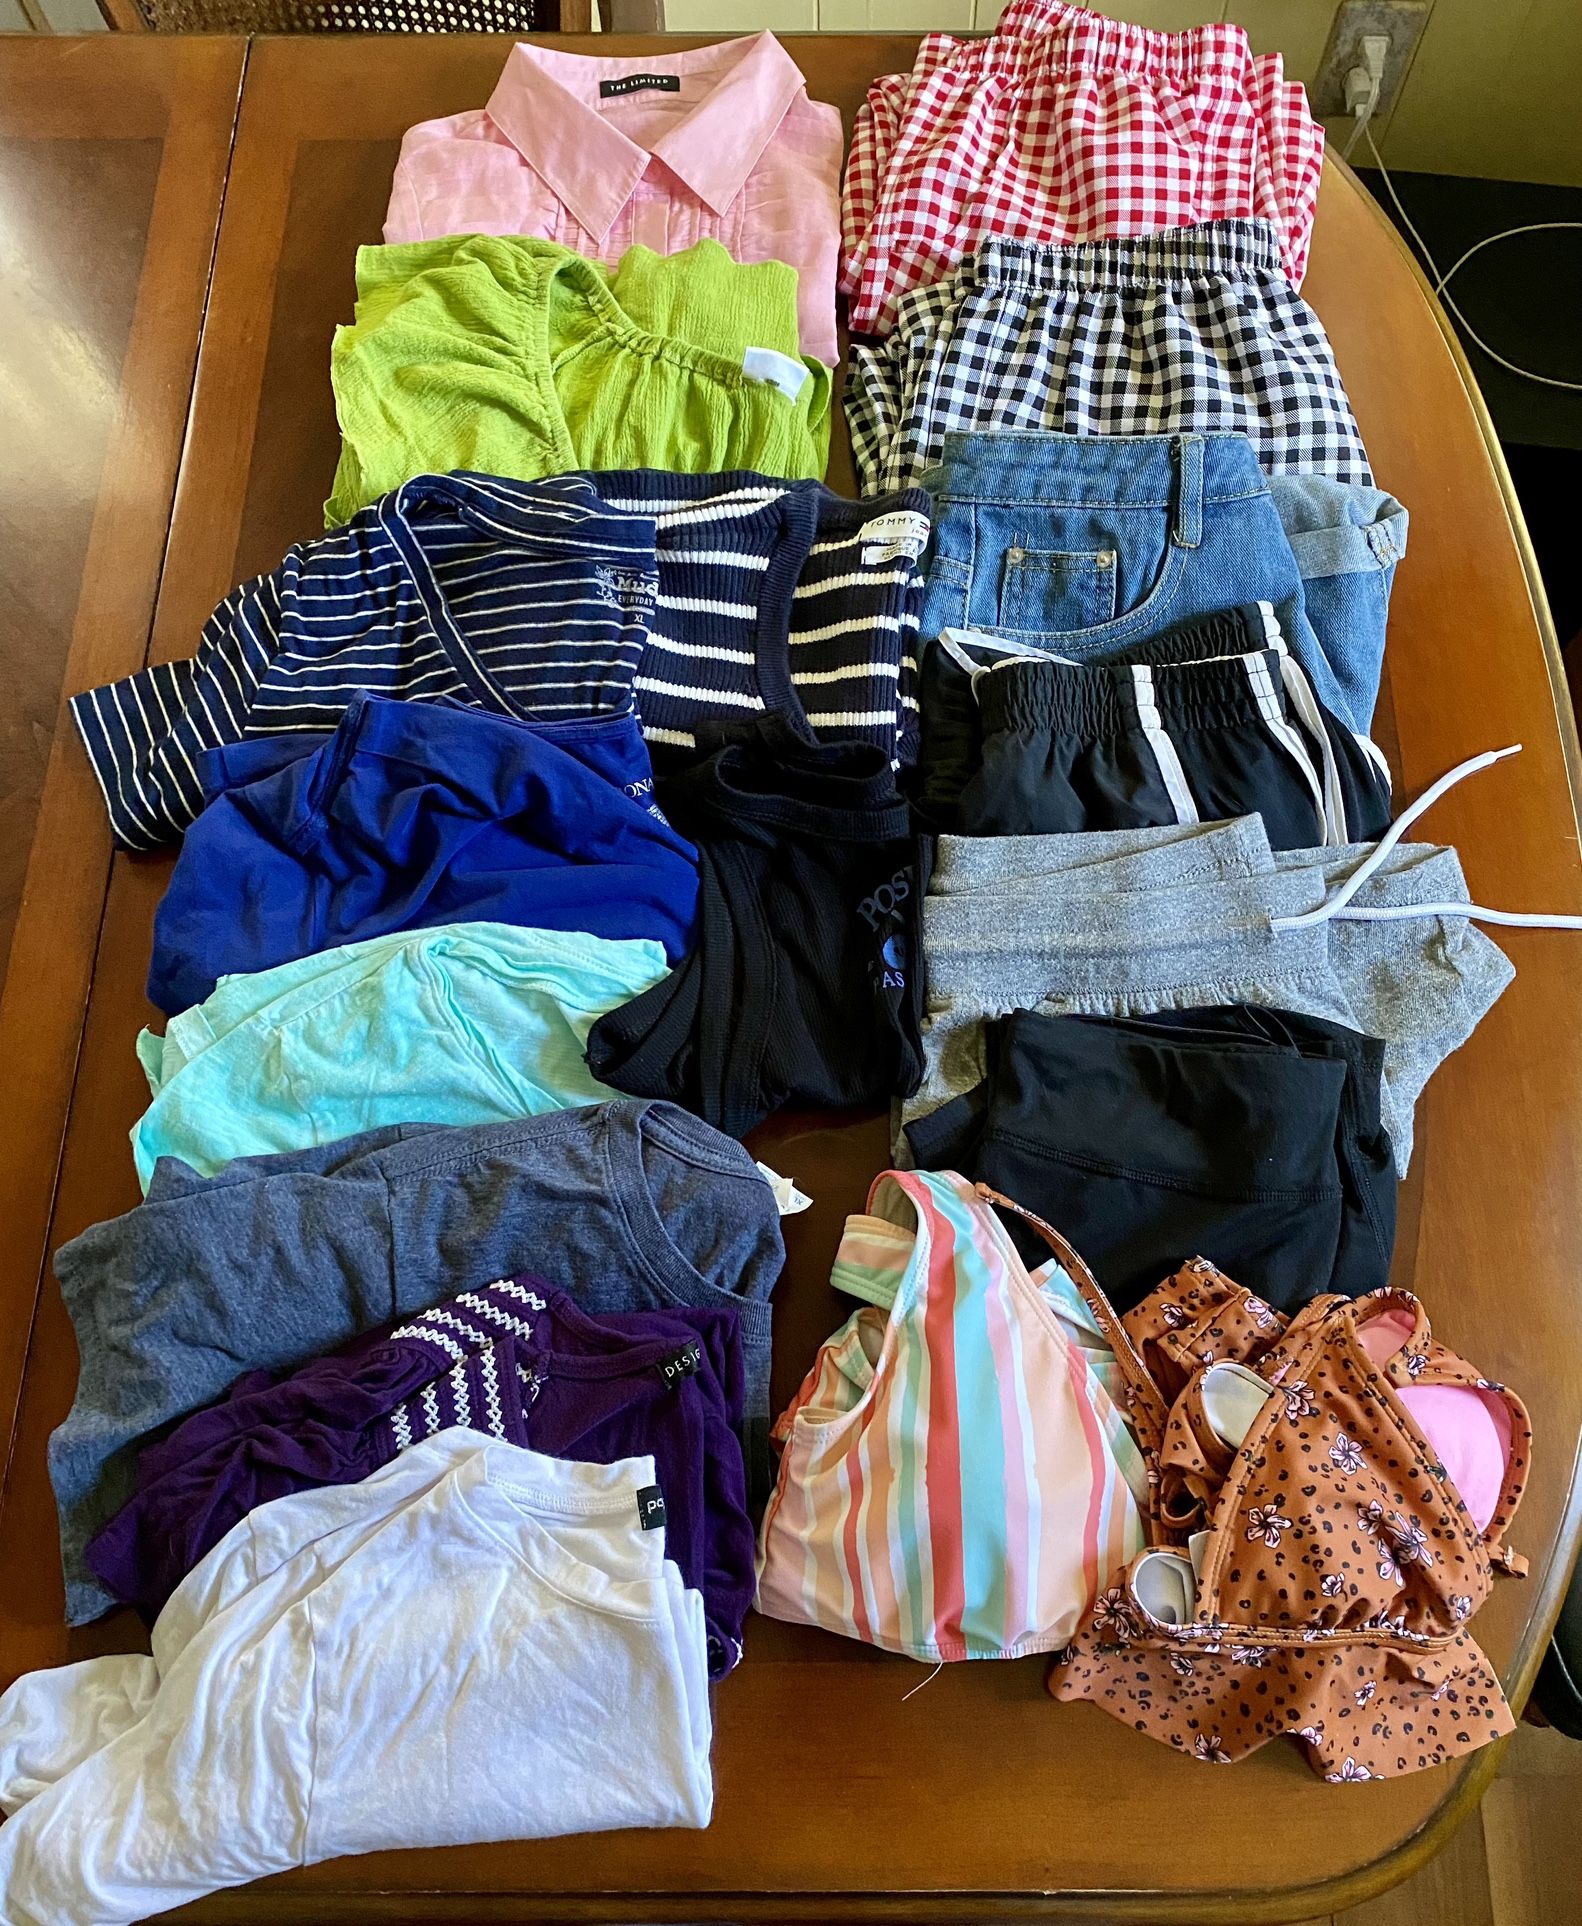 Girls Size 14/16 Summer Clothes 